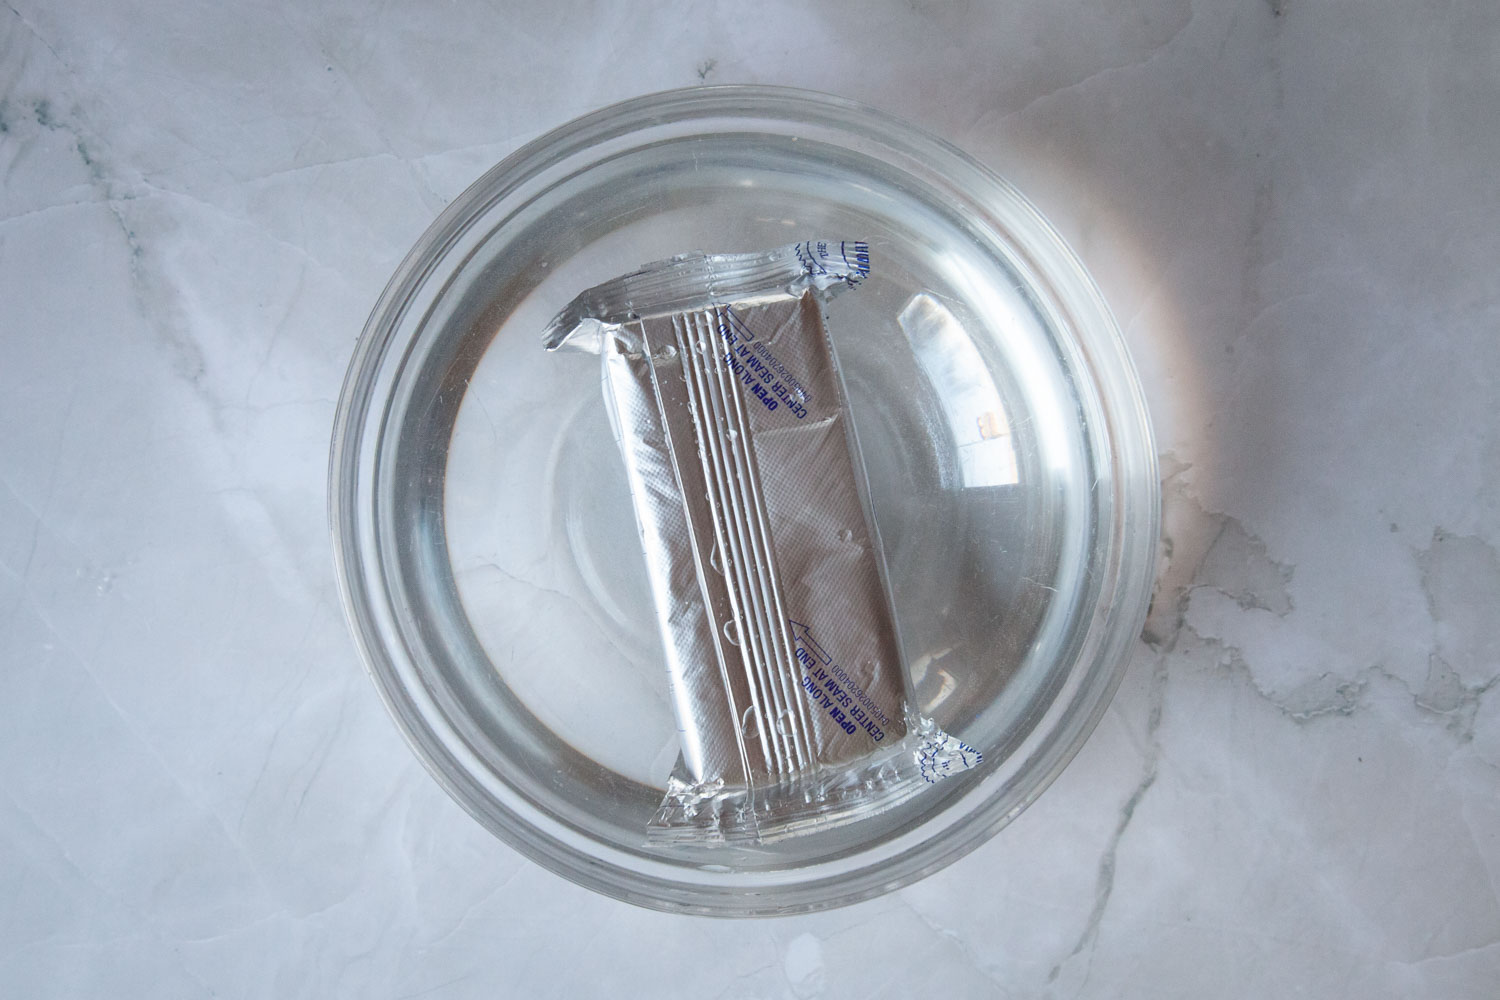 A brick of cream cheese still in its foil wrapper, submerged in hot water in a glass bowl.